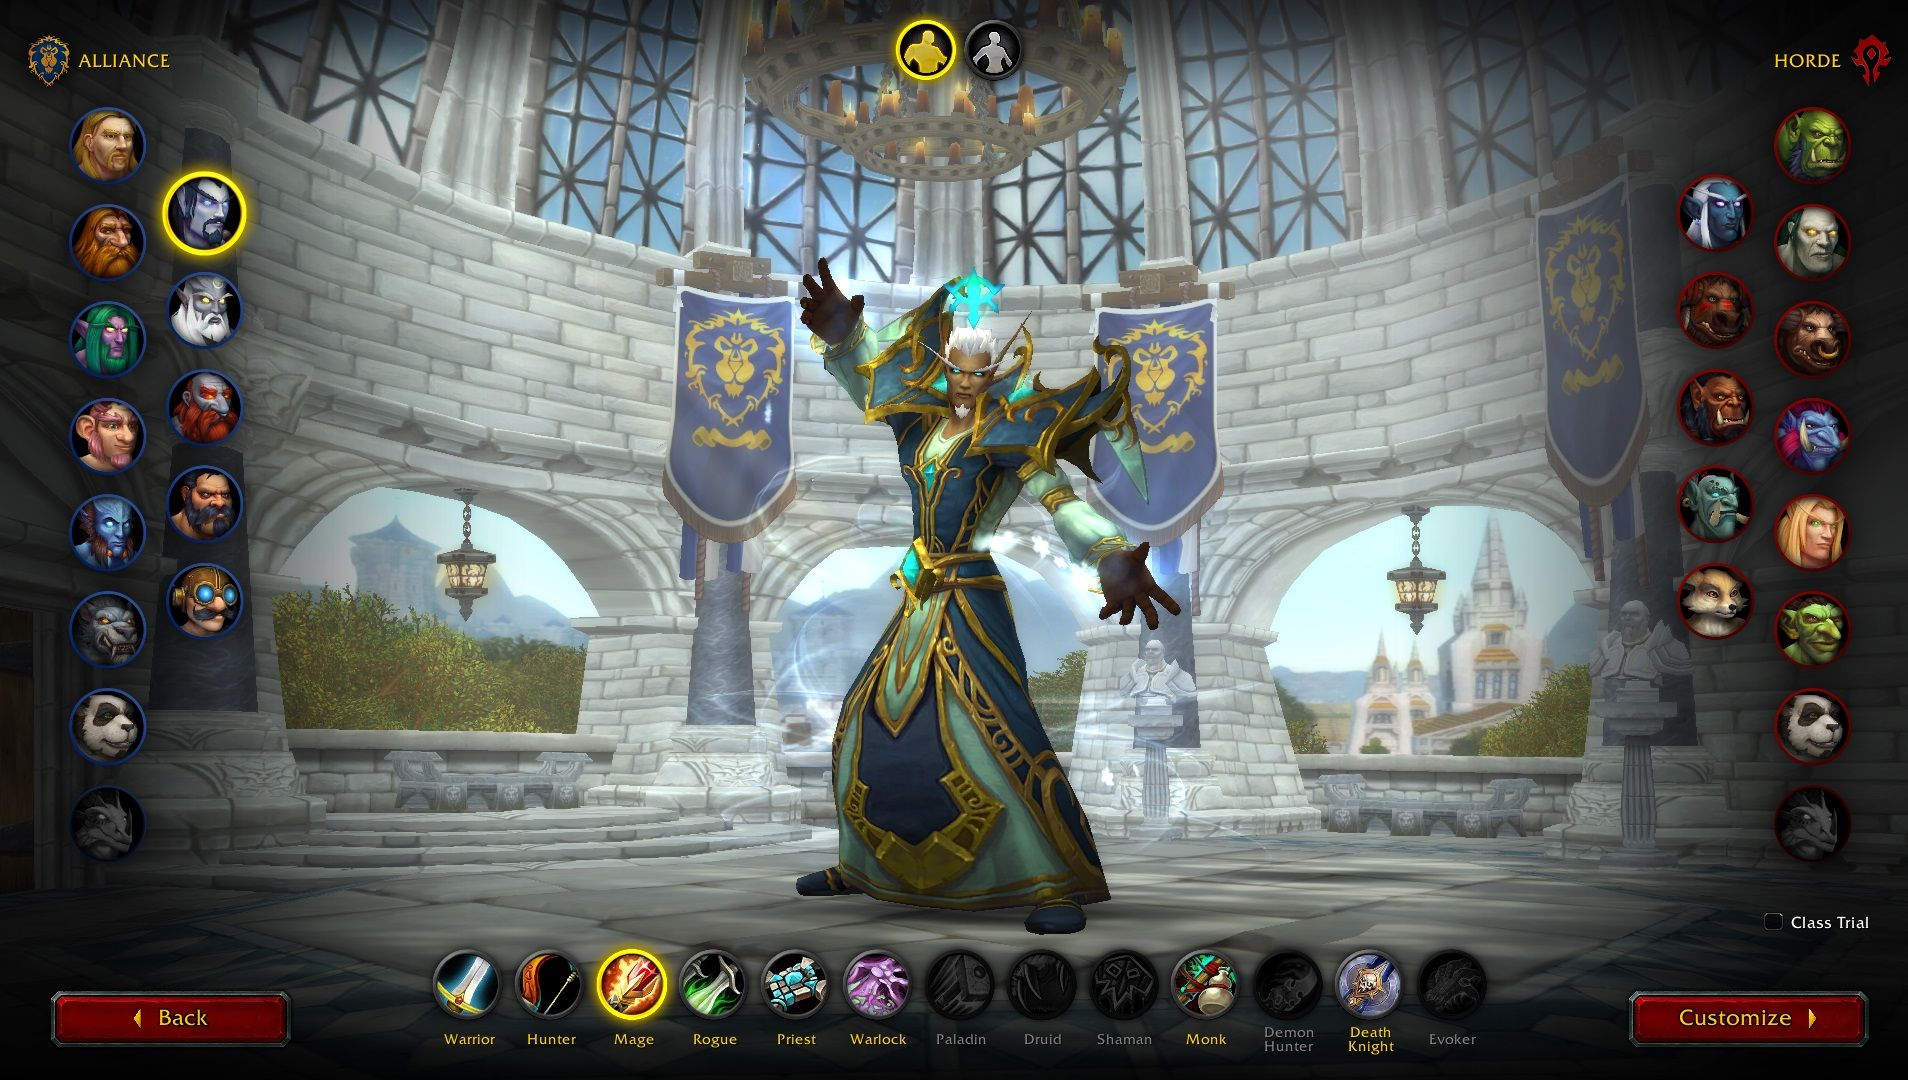 A preview of a Void Elf Mage on the character creation screen in World of Warcraft.